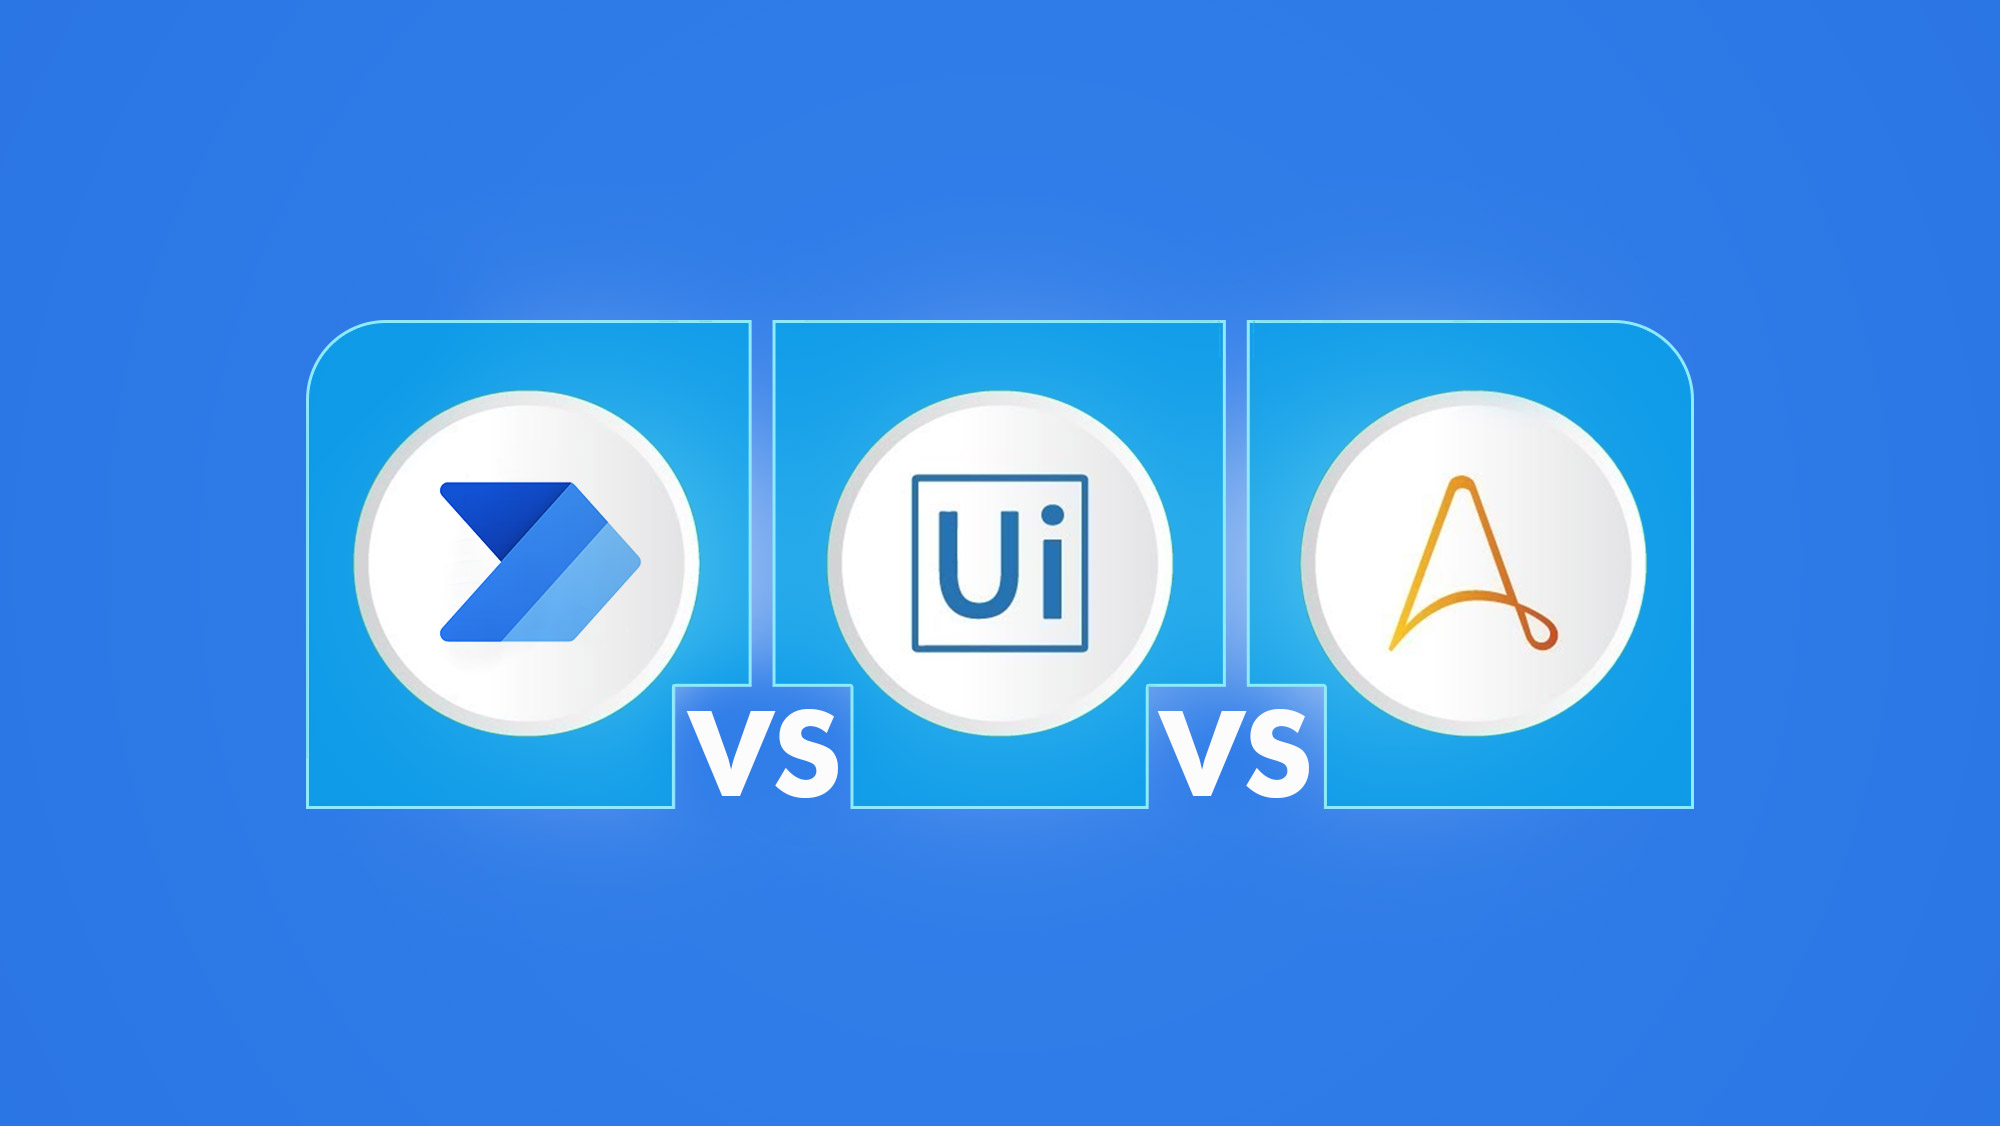 Power Automate vs UiPath vs Automation Anywhere: Which Automation Tool Is Right for Your Business?